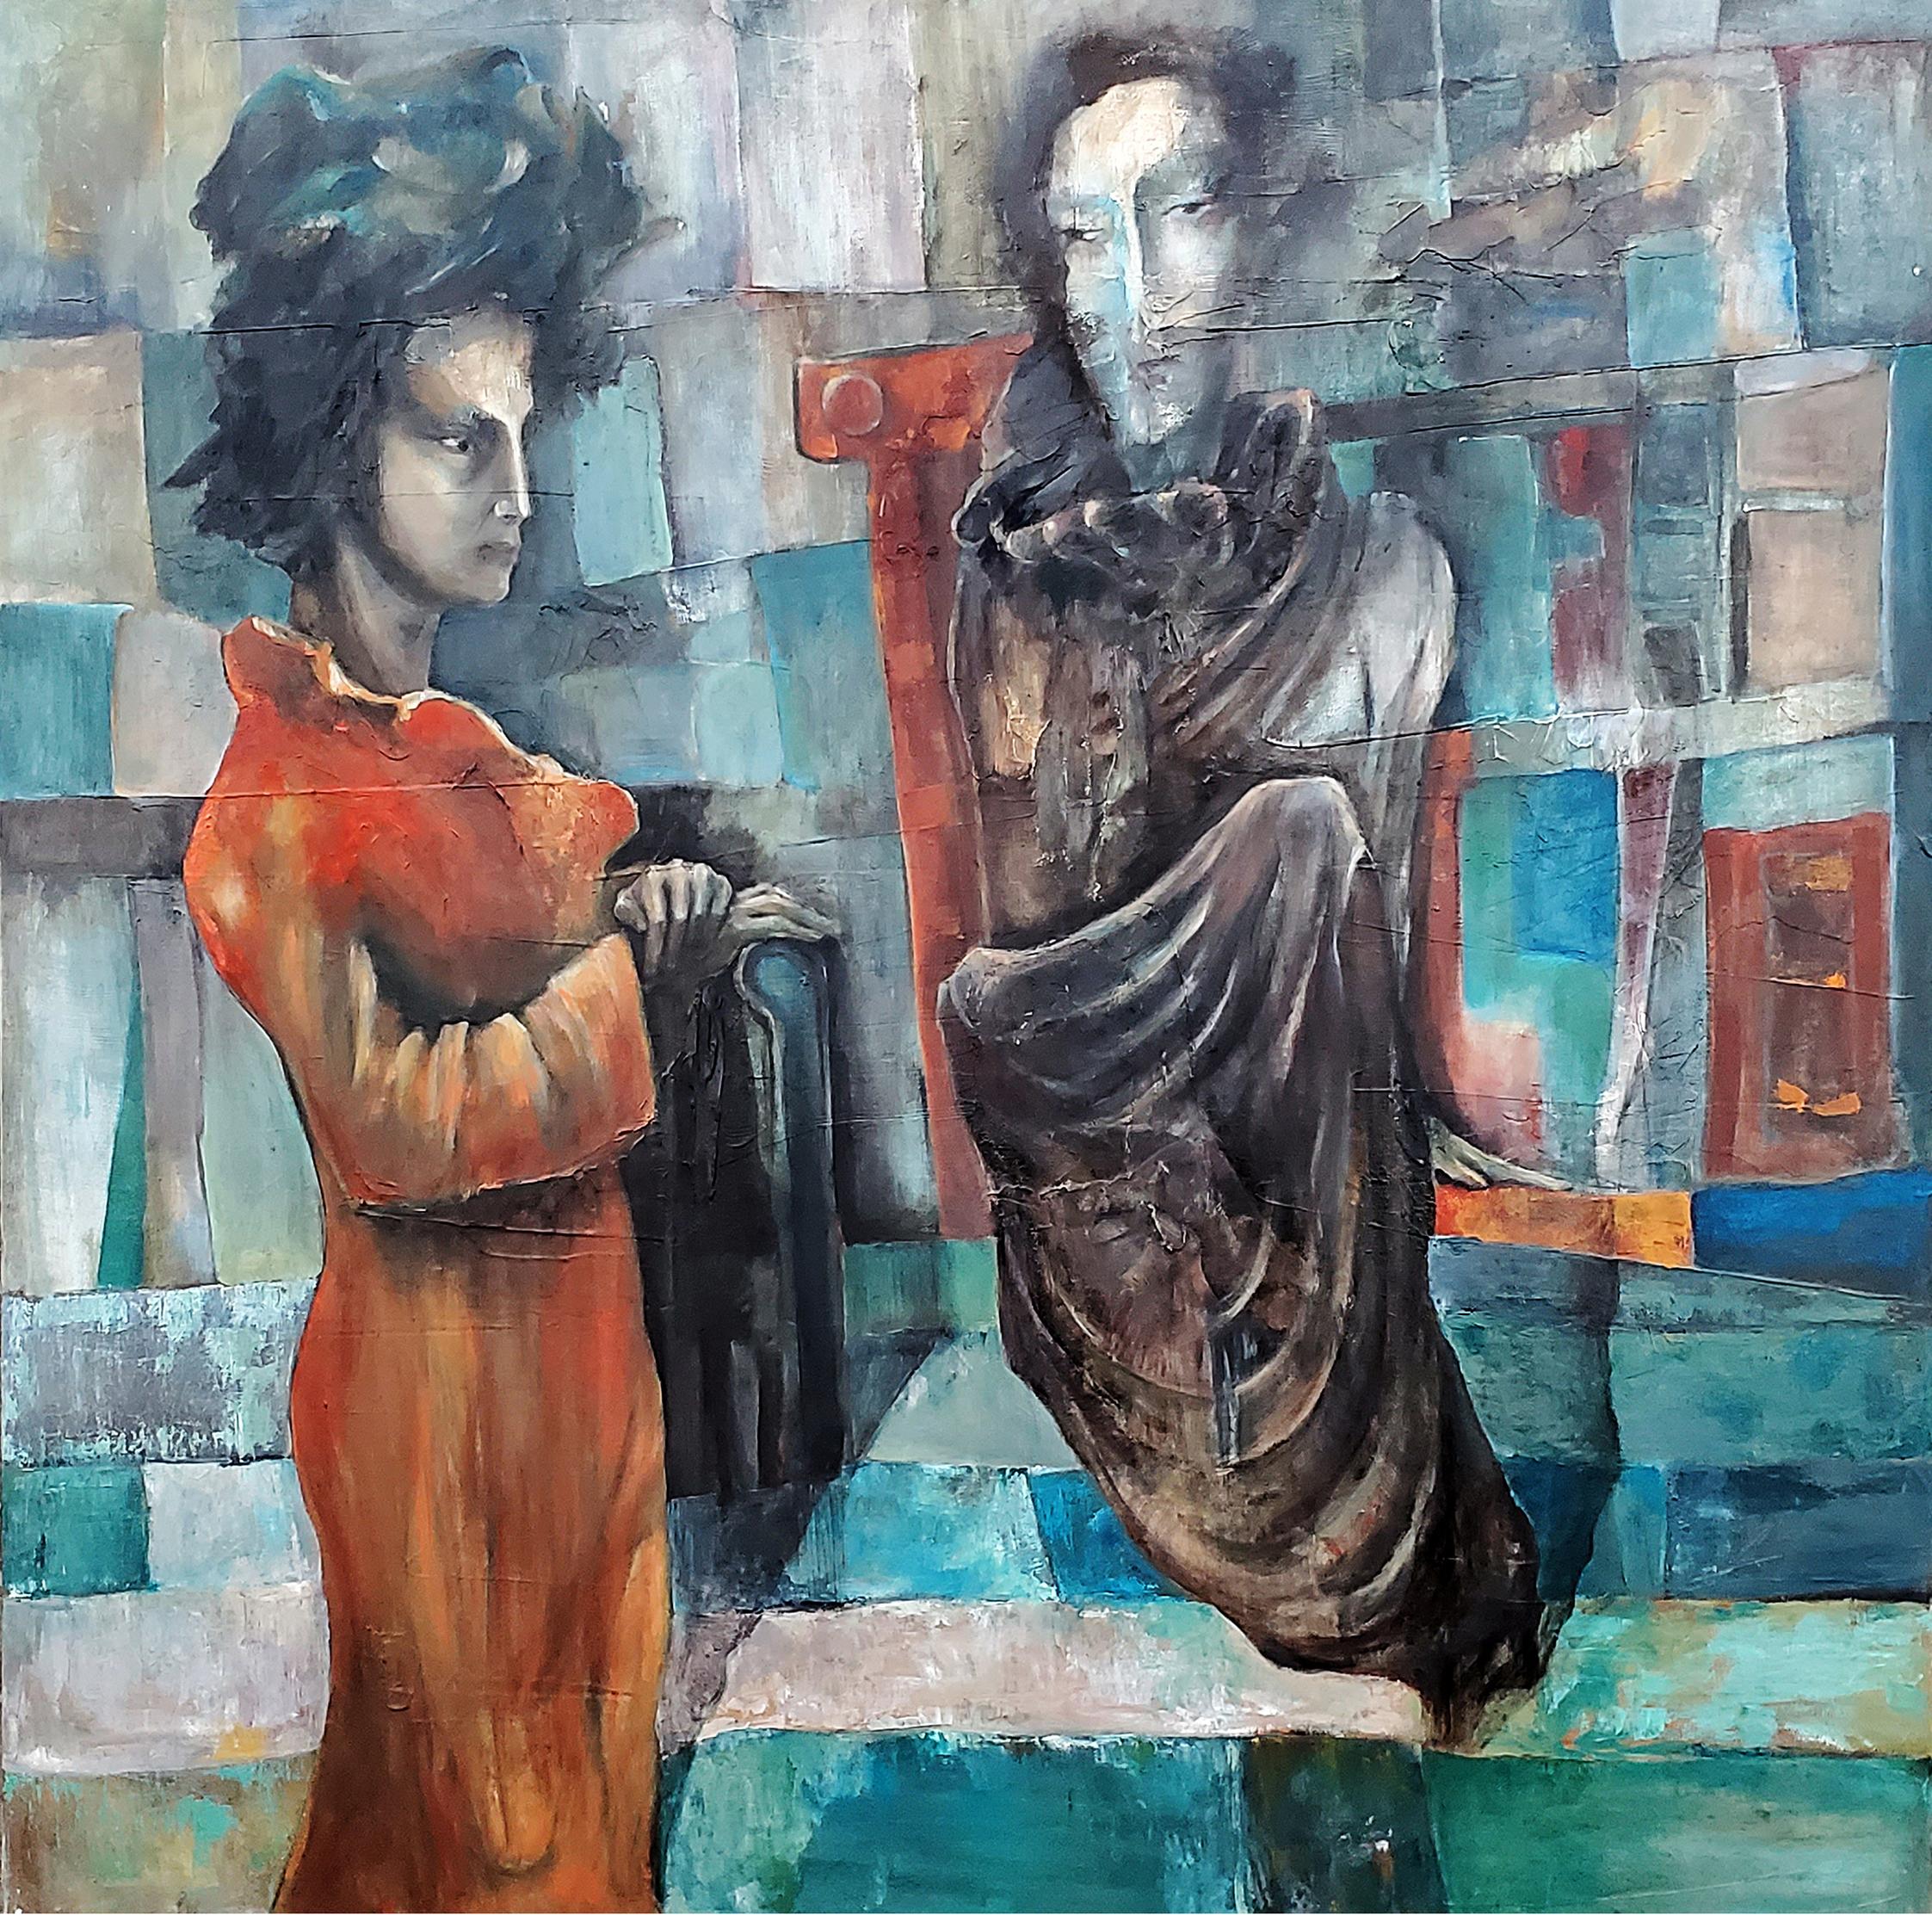 "DON'T EXPLAIN" Oil Painting 39" x 39" inch by Khoren Keshishyan

Khoren Keshishyan is a celebrated American-Armenian painter and artist whose unique
blend of architectural sensibilities and artistic creativity has garnered international
acclaim.